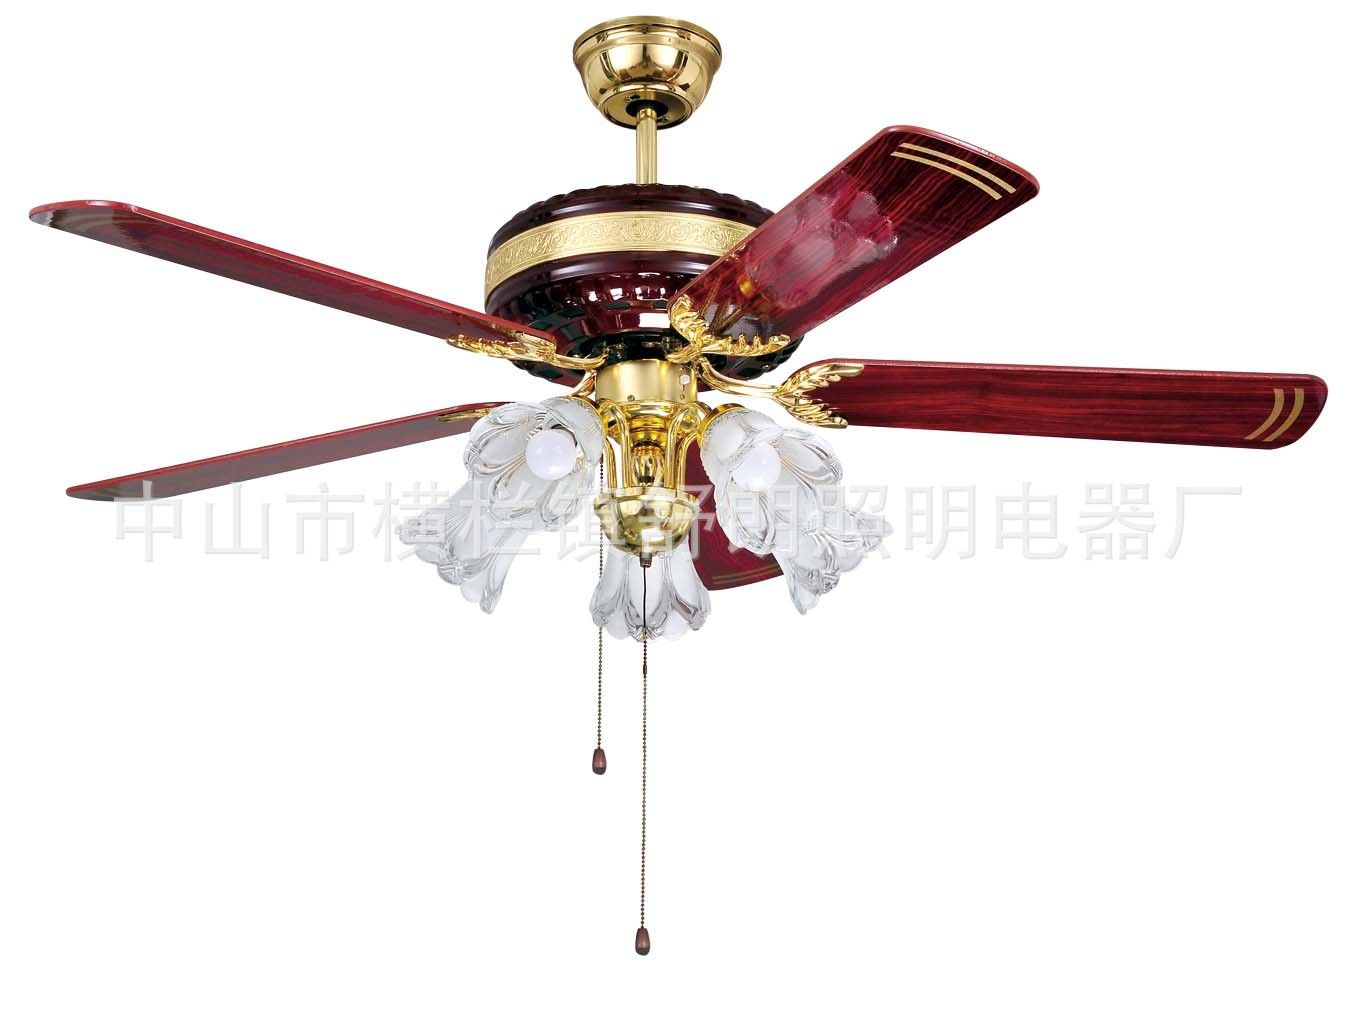 2019 Special Fan Lights Wholesale Red Wood Jin Xiqing Restaurant Bedroom Luxury Decorative Ceiling Fan Lights Fan Lights From Cervelo 457 63